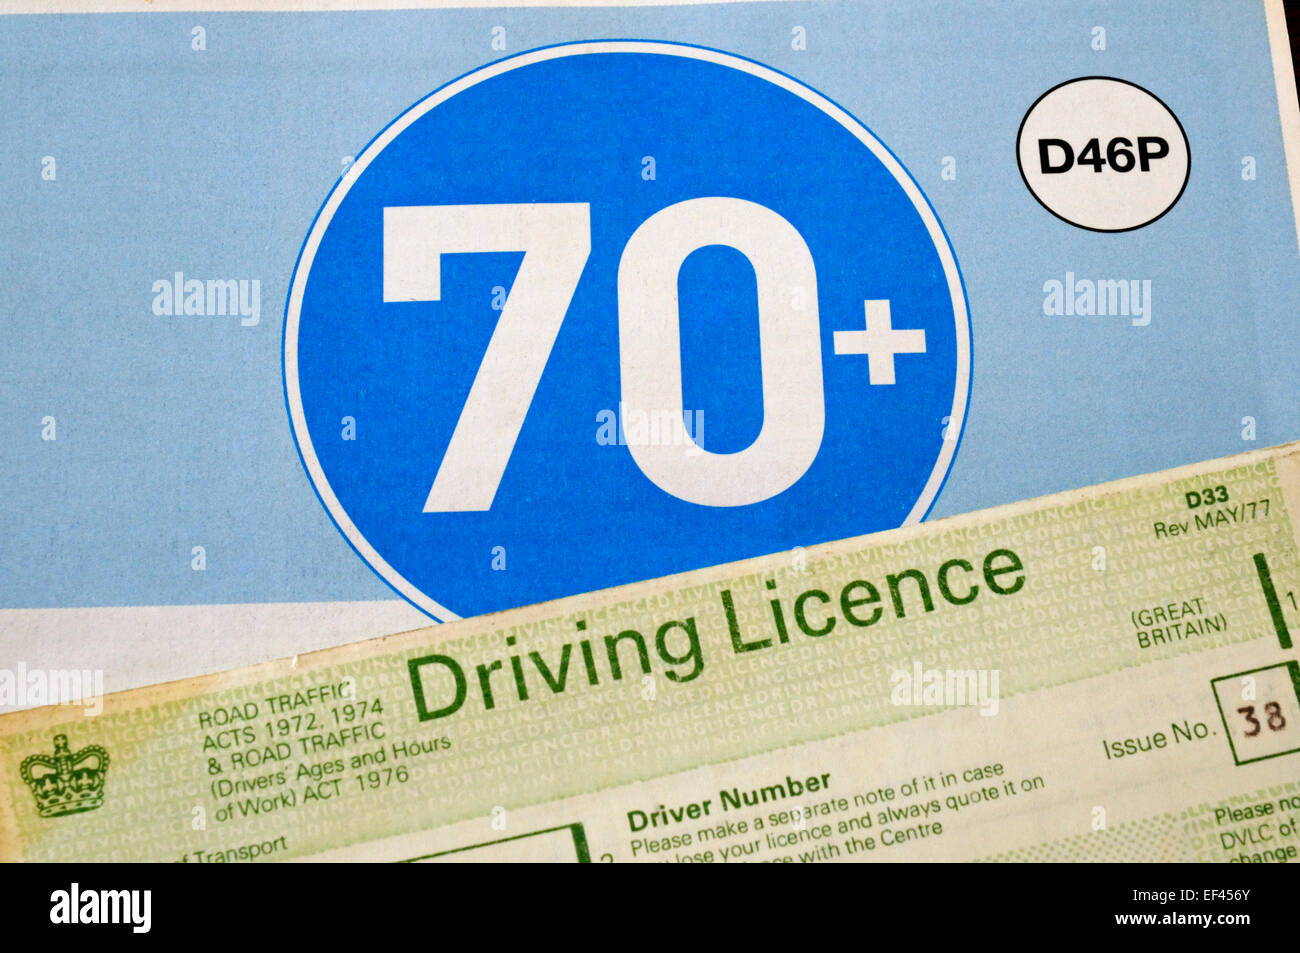 Www gov uk renew driving licence at 70 for free